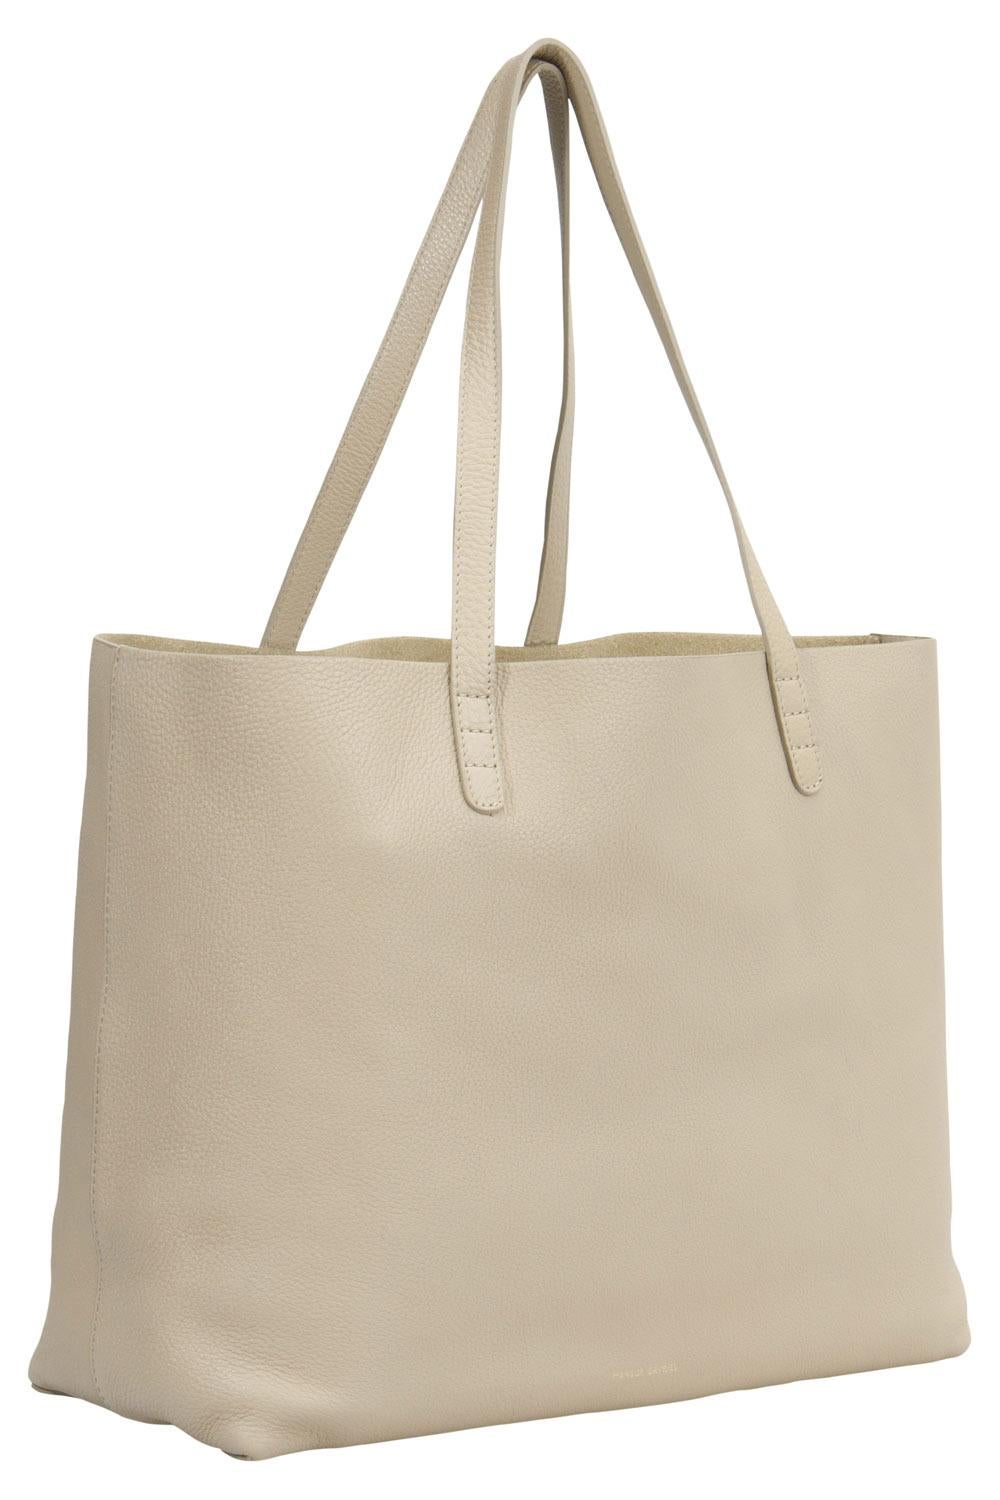 The tote from Mansur Gavriel is a timeless piece. The leather bag comes in a luxurious beige hue with gold-tone hardware. It features double top handles. The bag opens to reveal a spacious interior with enough space to easily hold your necessities.